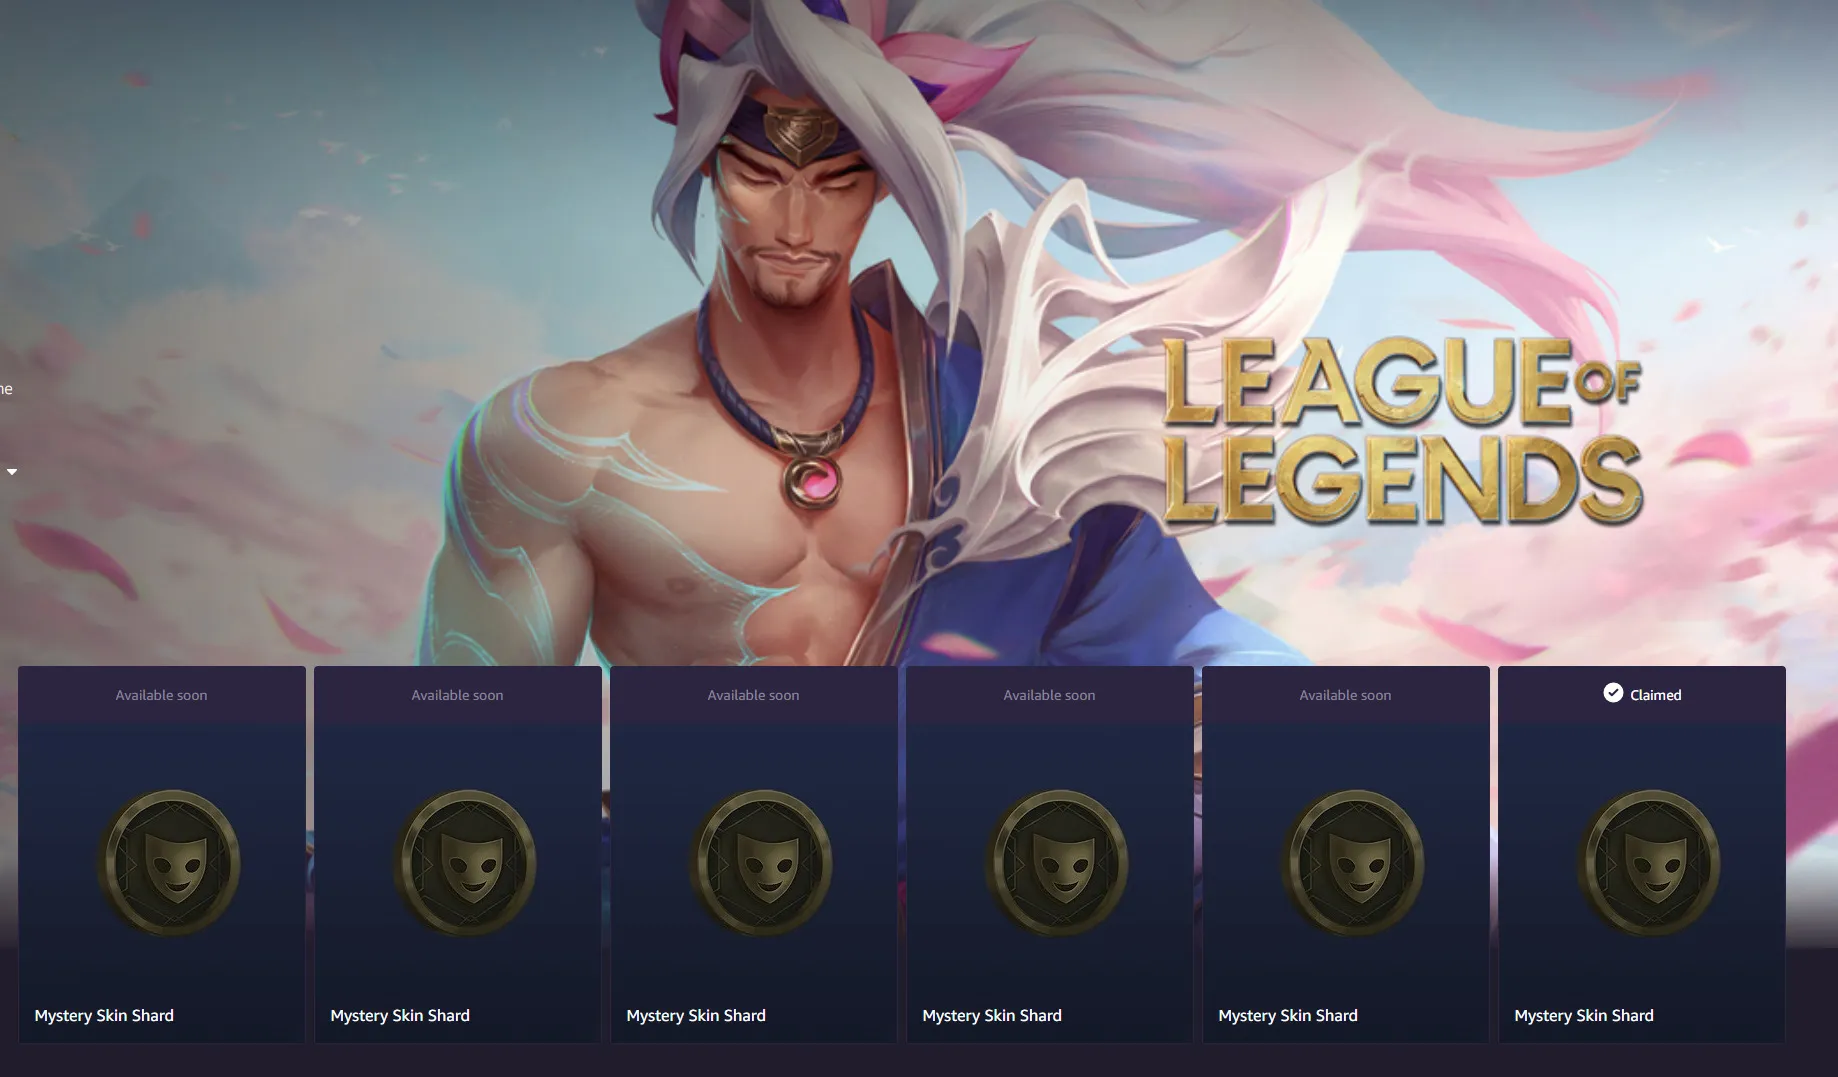 League of Legends and Teamfight Tactics Twitch Prime loot